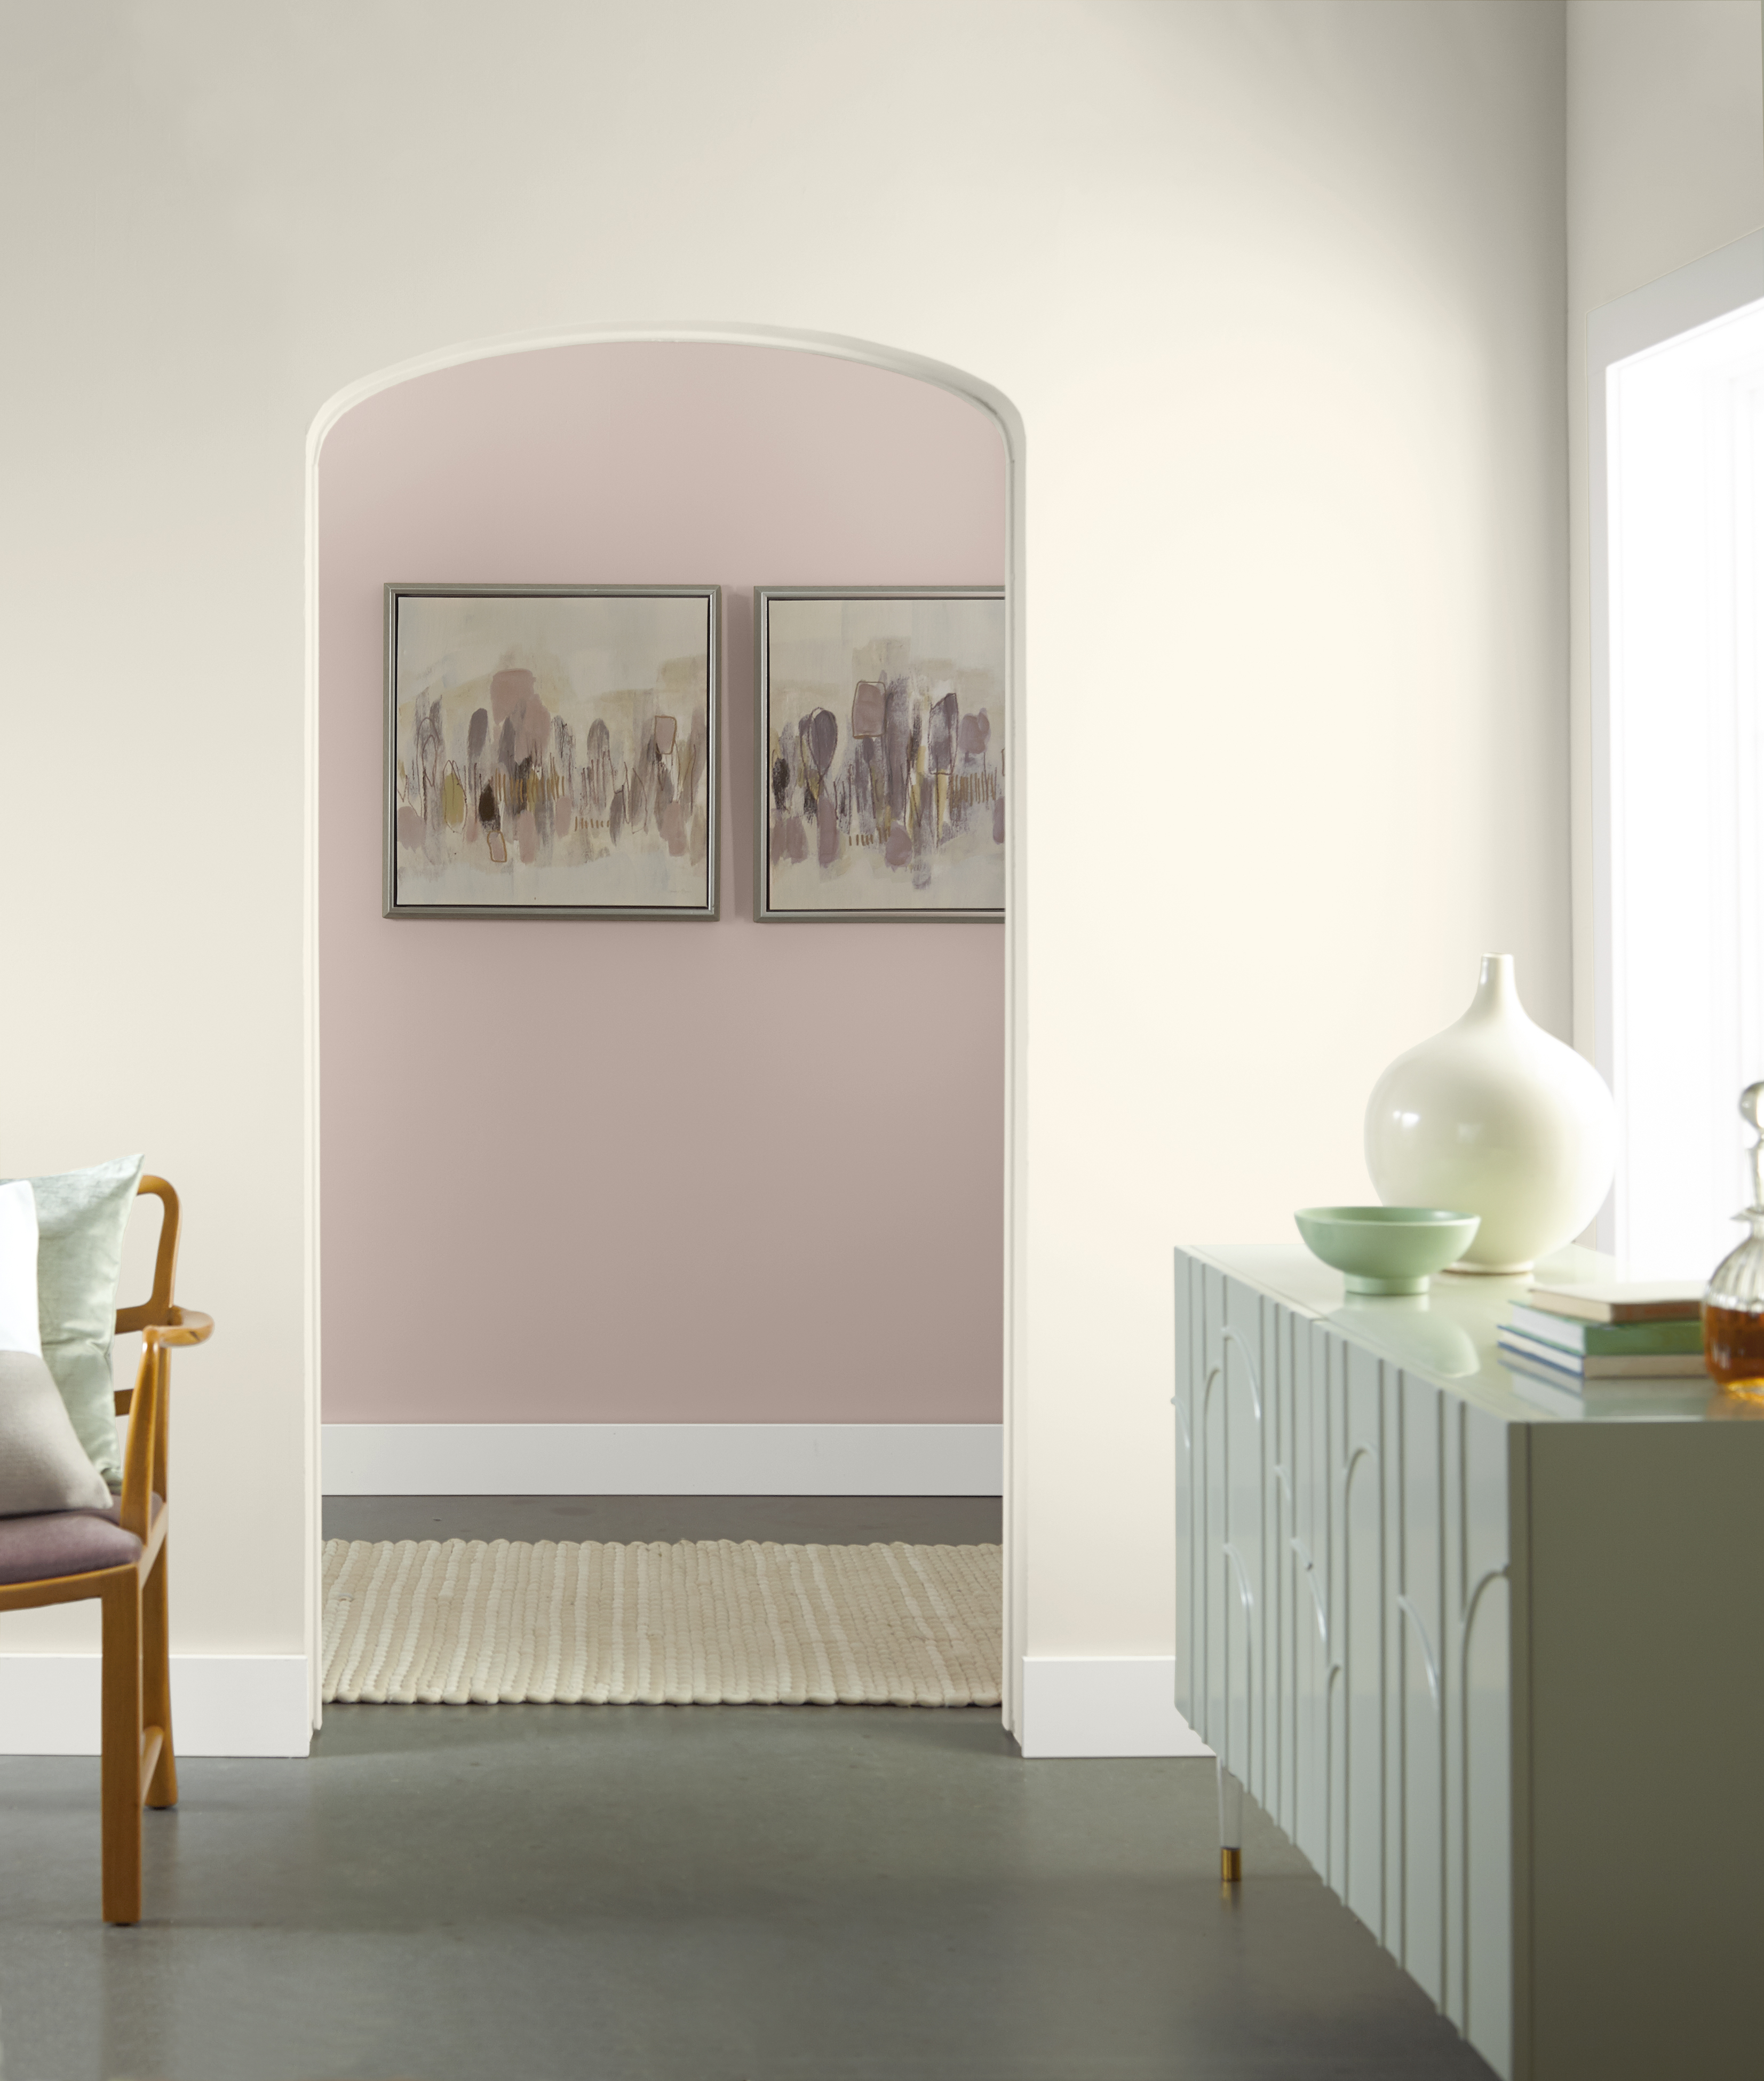 An archway with a view into an entry space painted in Smokey Pink